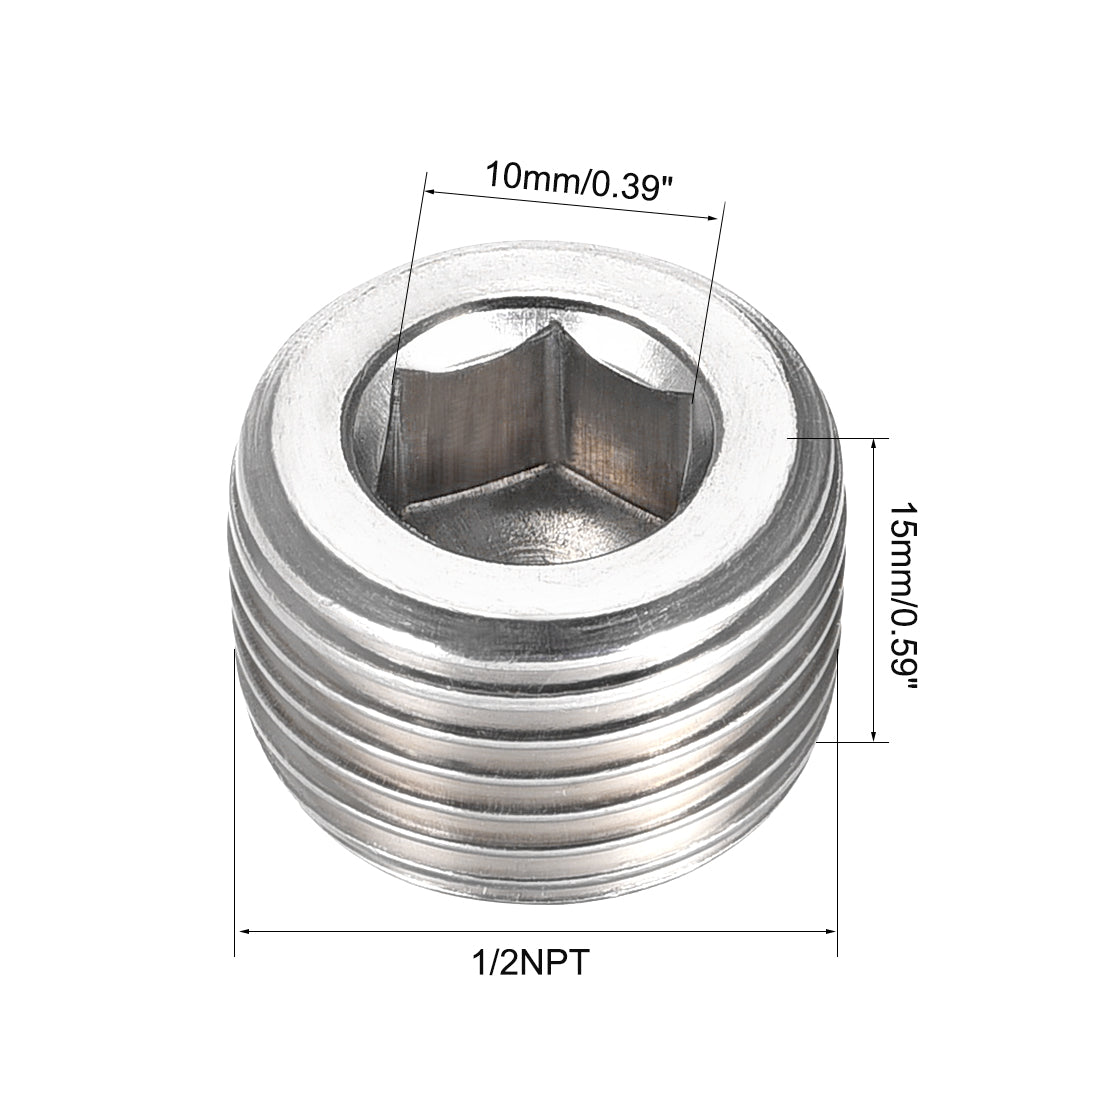 Uxcell Uxcell Hex Countersunk Plug - Stainless Steel Pipe Fitting 1/4NPT Male Thread Socket Pipe Adapter Connector